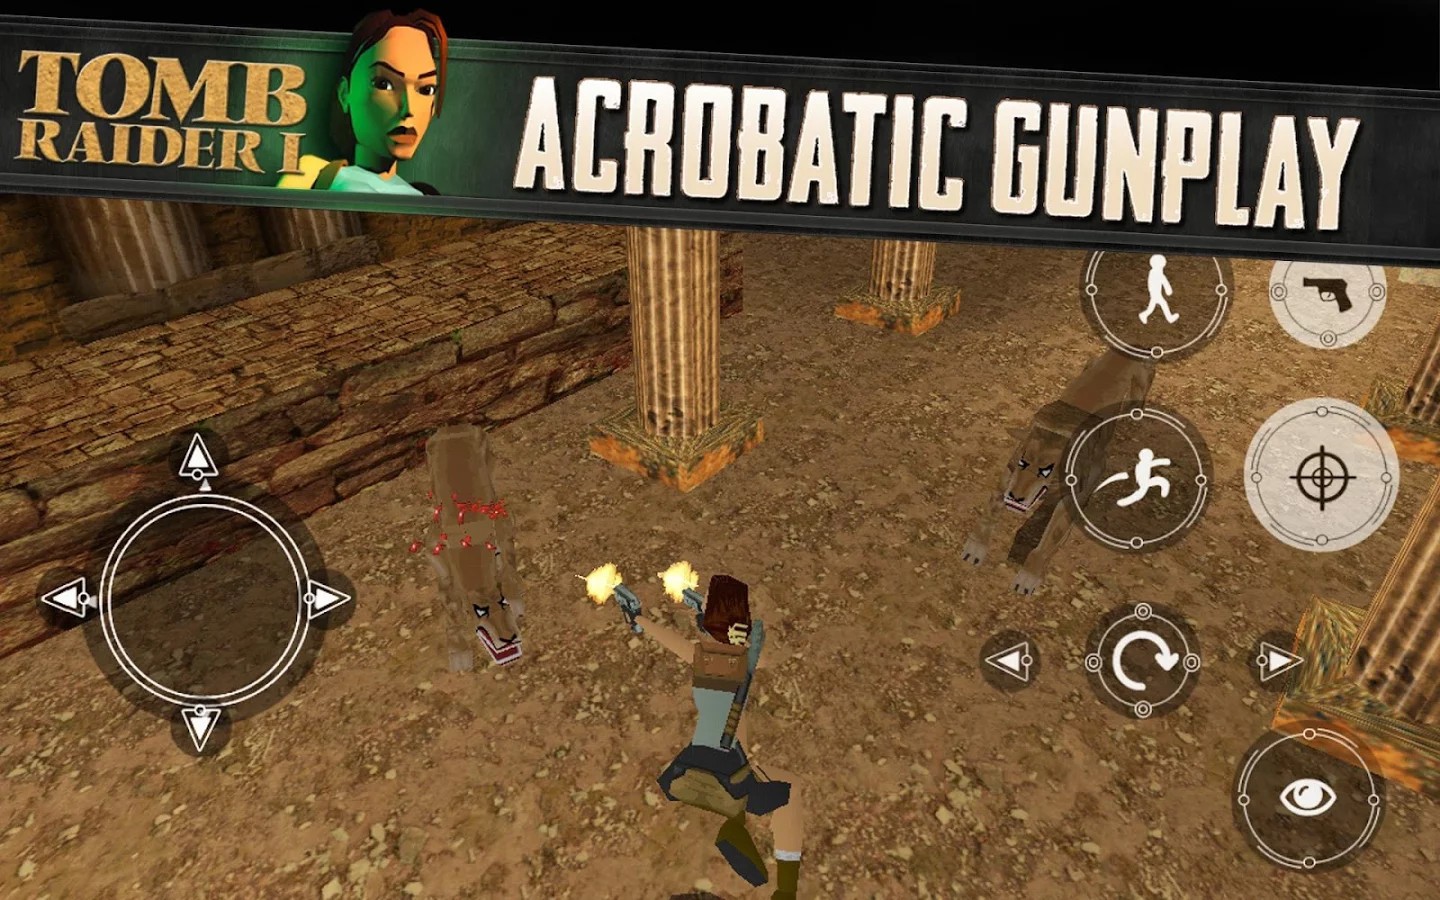 The Original Tomb Raider Unleashed on Google Play Store